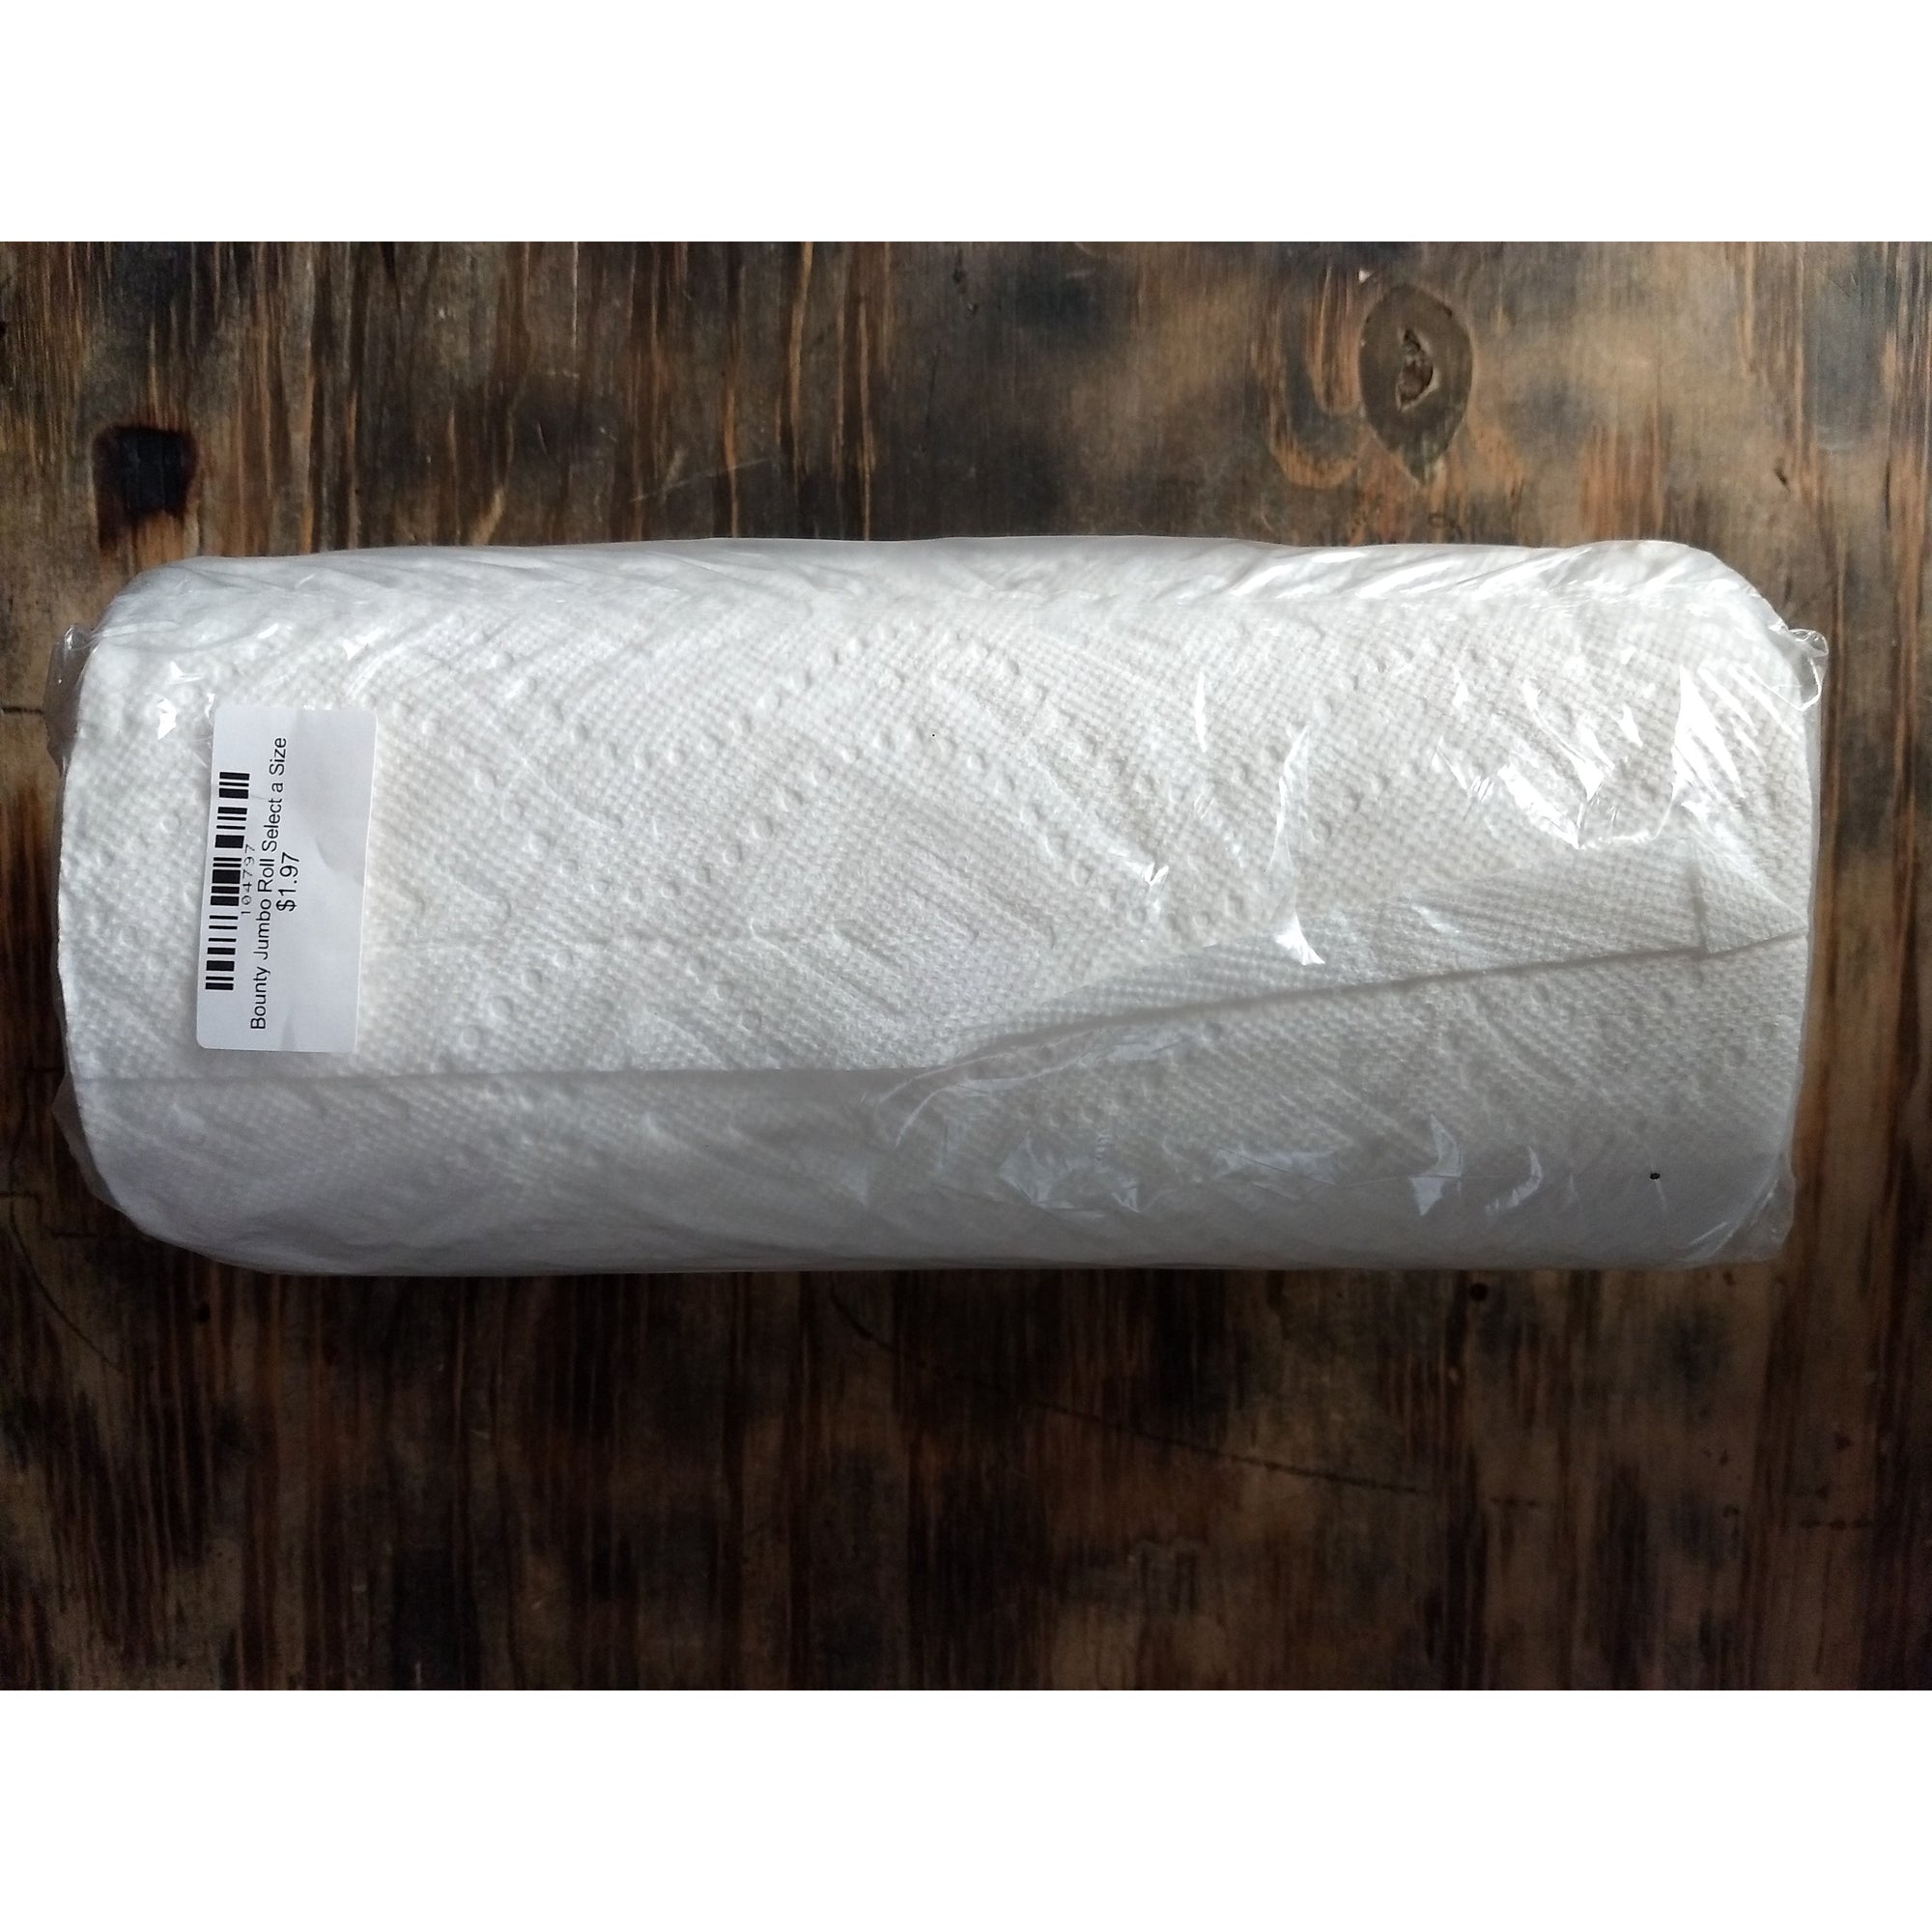 Bounty Jumbo Roll Paper Towel Select a Size 1 Ct